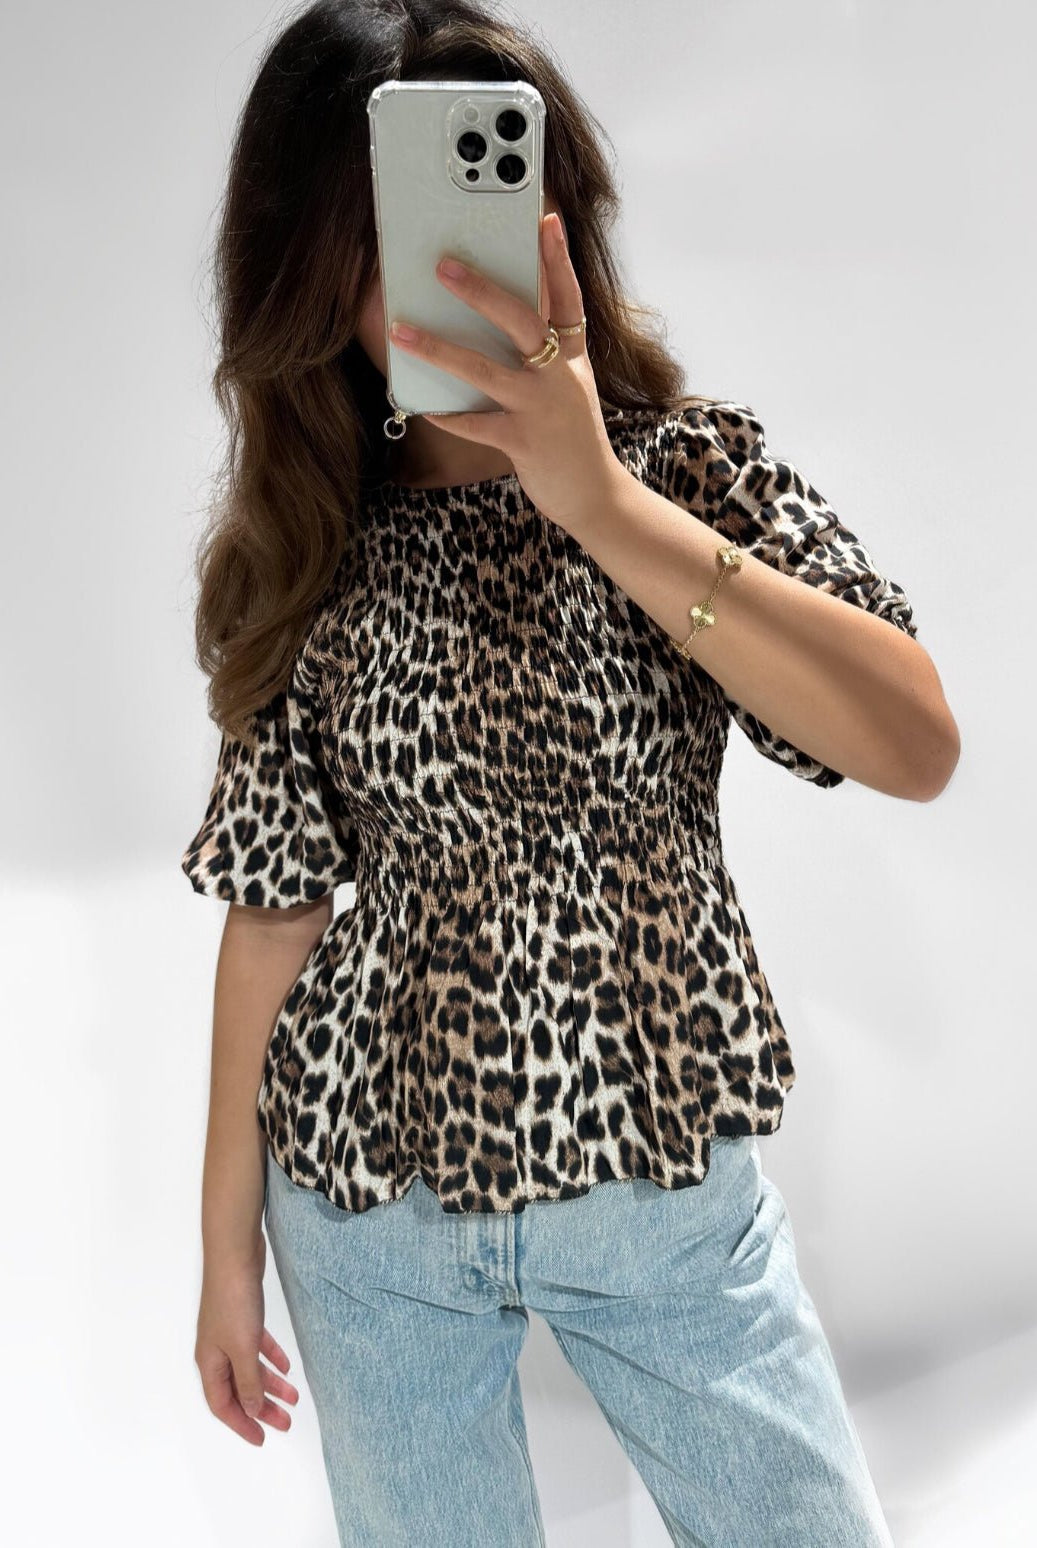 ♥︎MILEY TOP LEOPARD - PRE ORDER - My Favourites